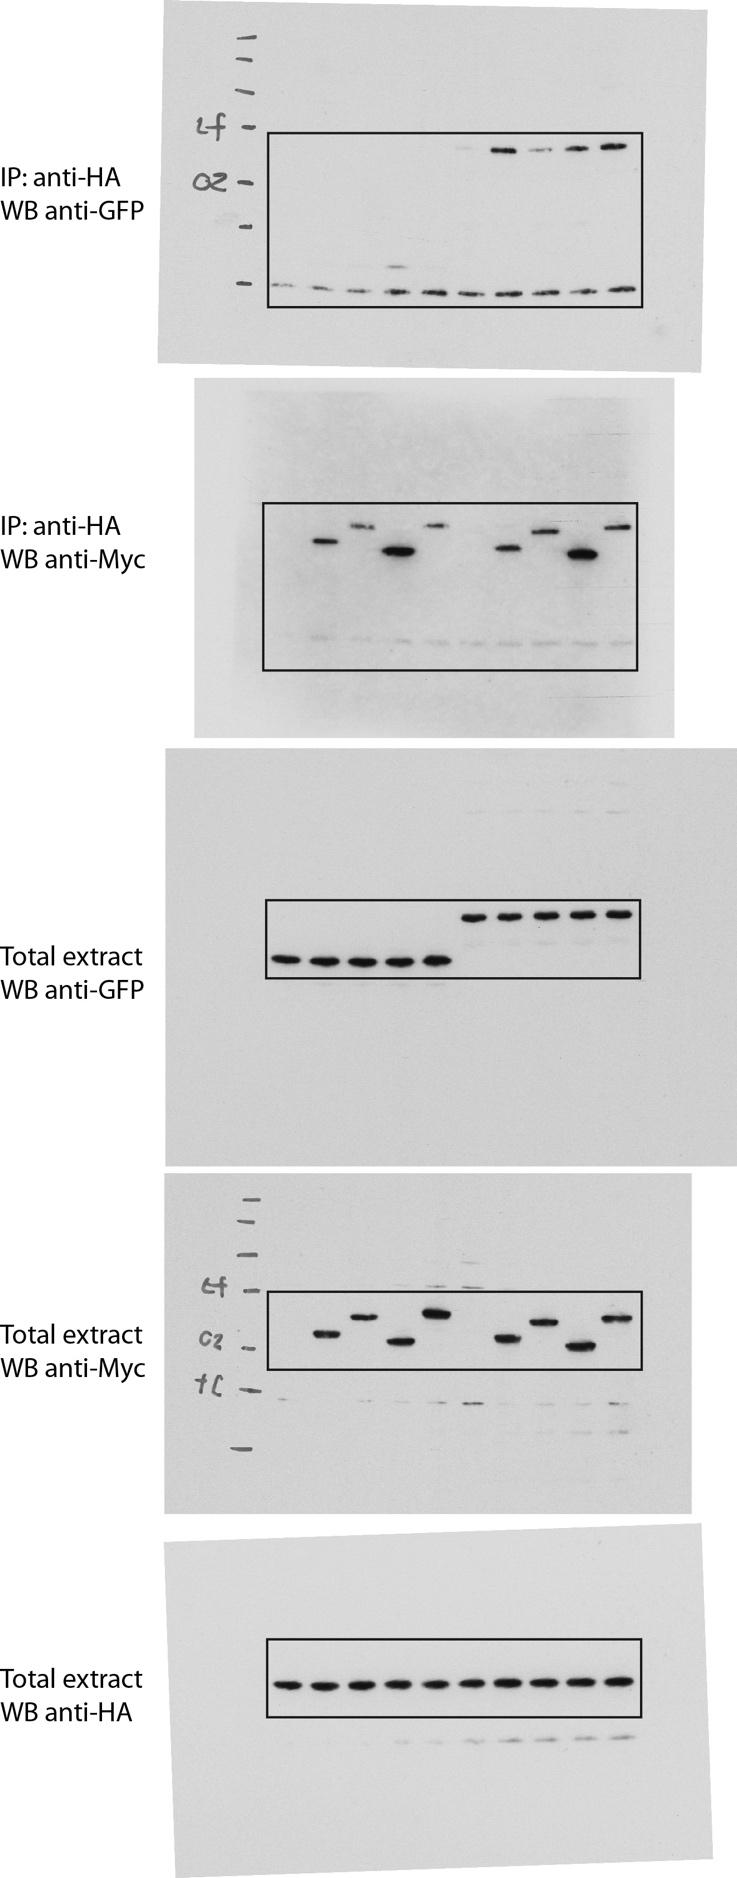 . Supplementary Figure 16: Uncropped Western blots corresponding to